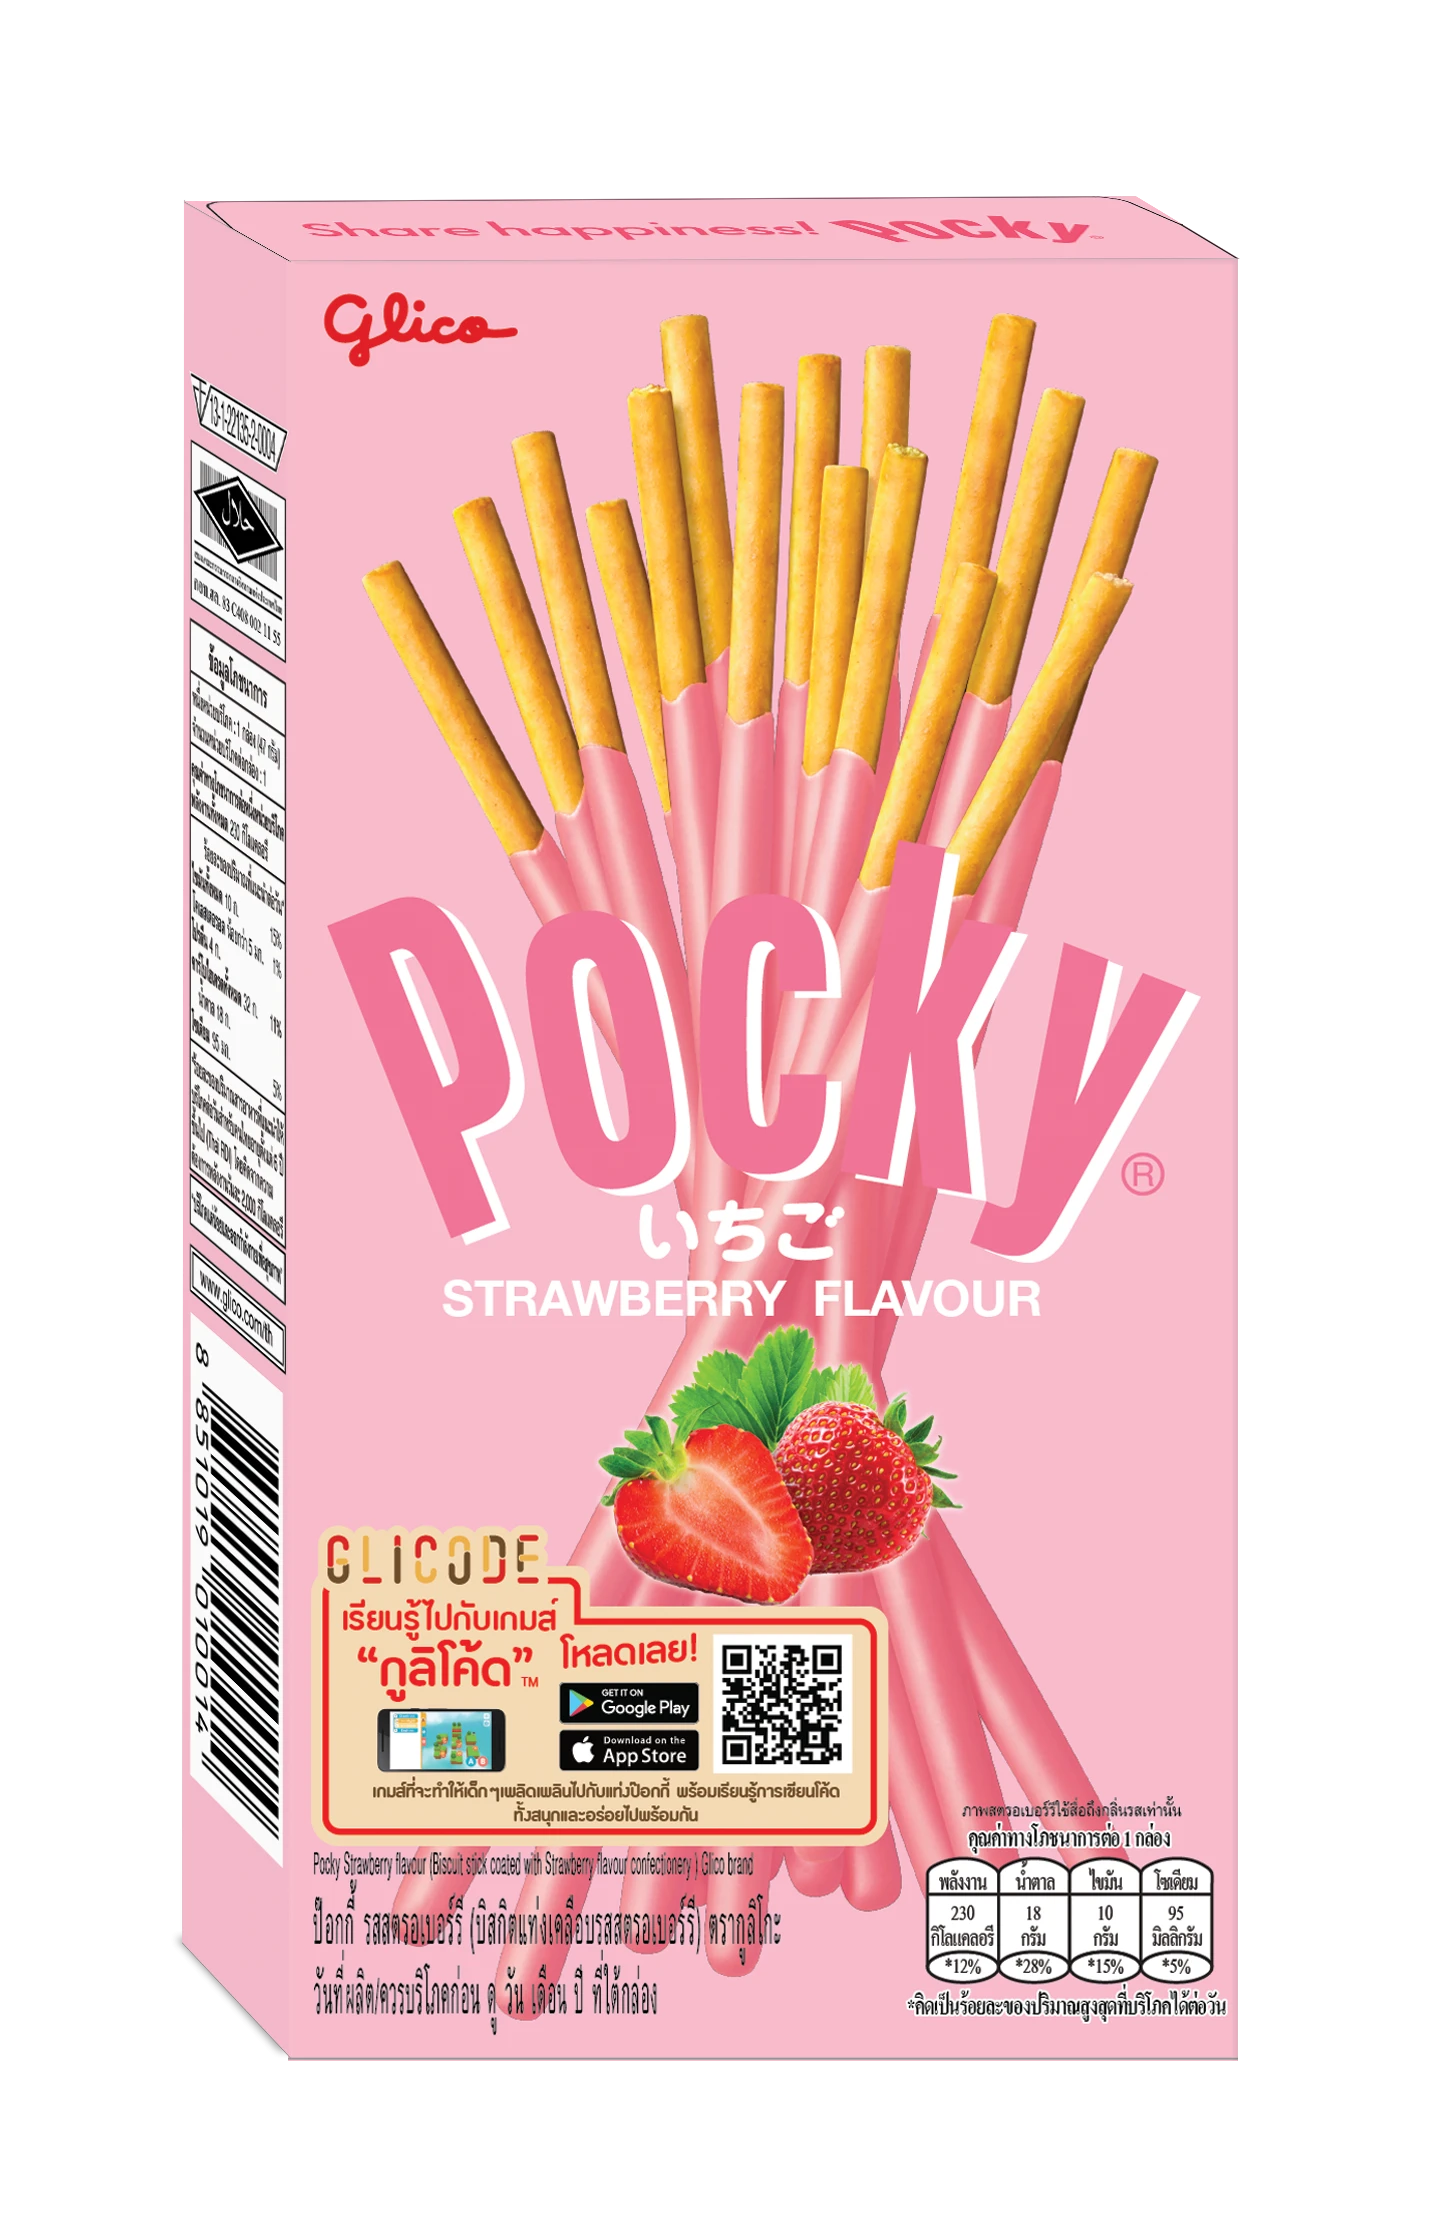 Pocky Strawberry Biscuit Stick Snack  From Thailand